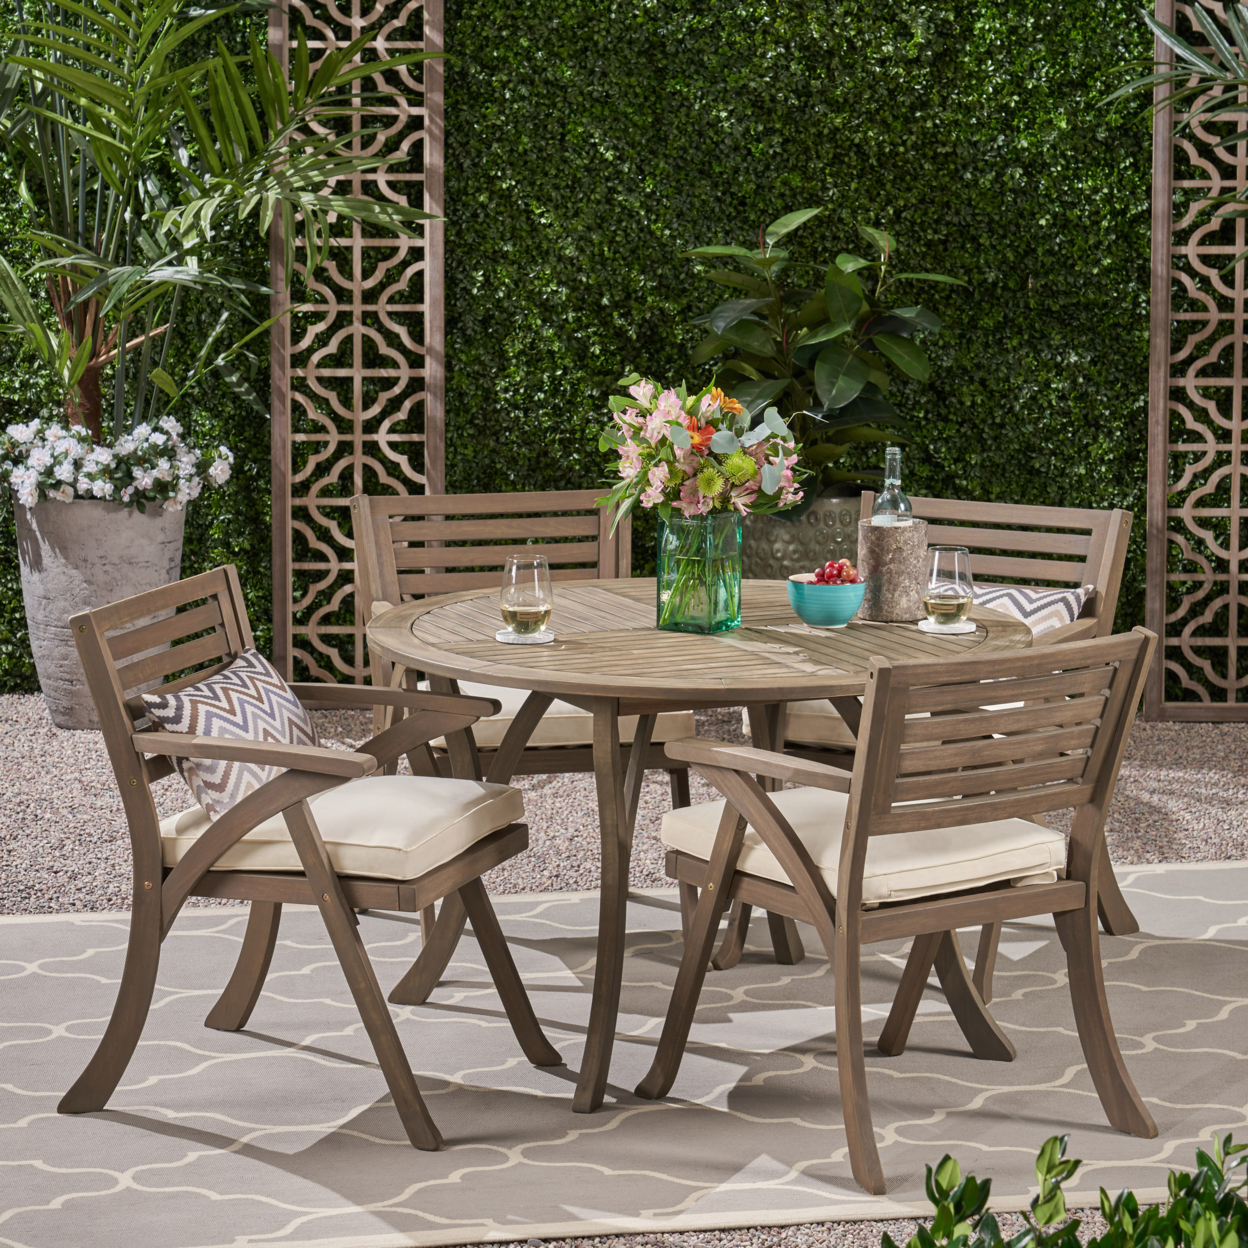 Chloe Outdoor 5 Piece Acacia Wood Dining Set With Round Table